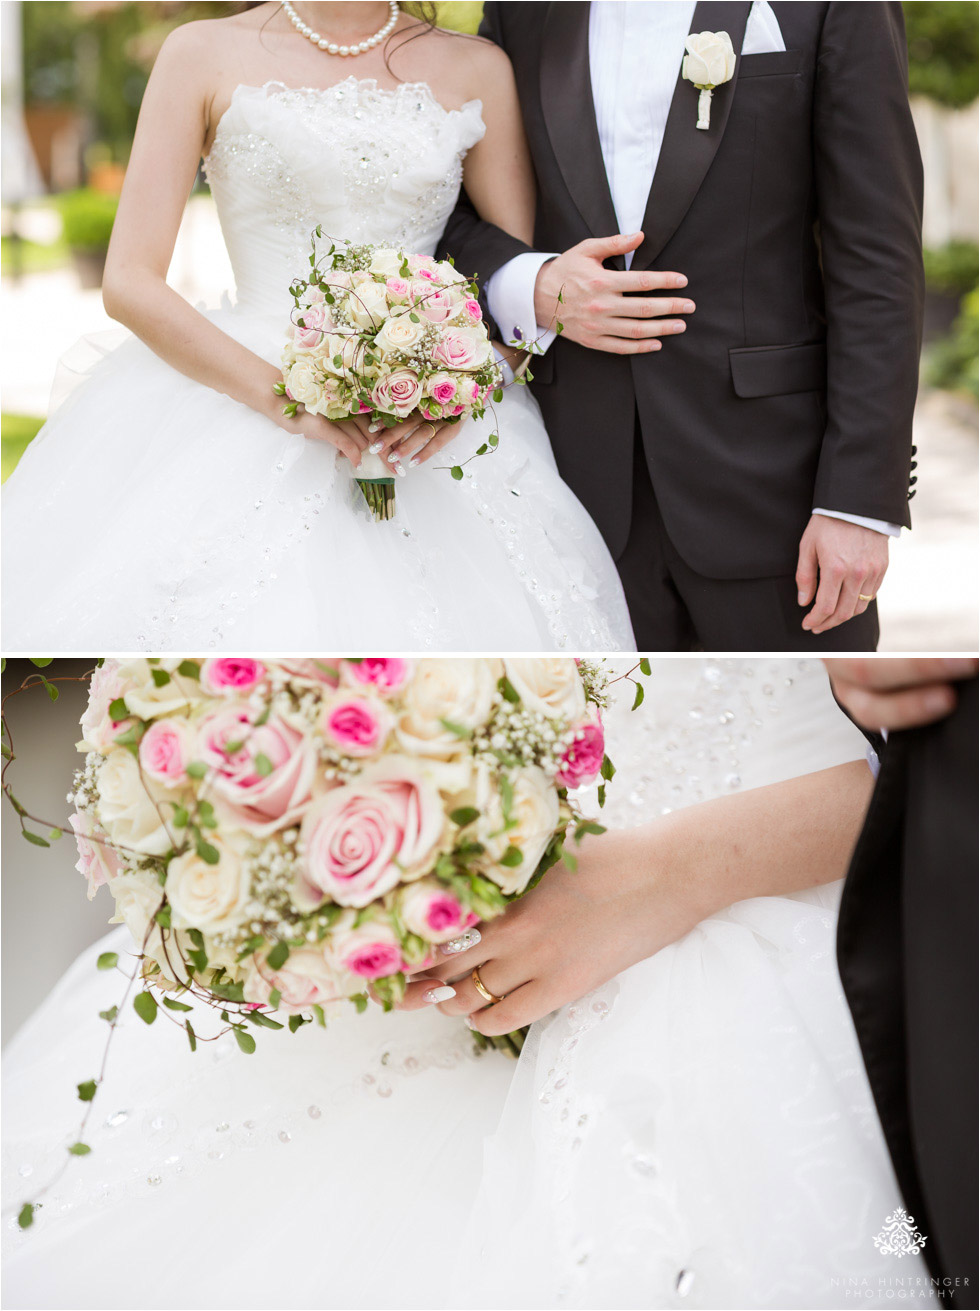 Detail photos of bride and grooms wedding outfits and the wedding bouquet - Blog of Nina Hintringer Photography - Wedding Photography, Wedding Reportage and Destination Weddings